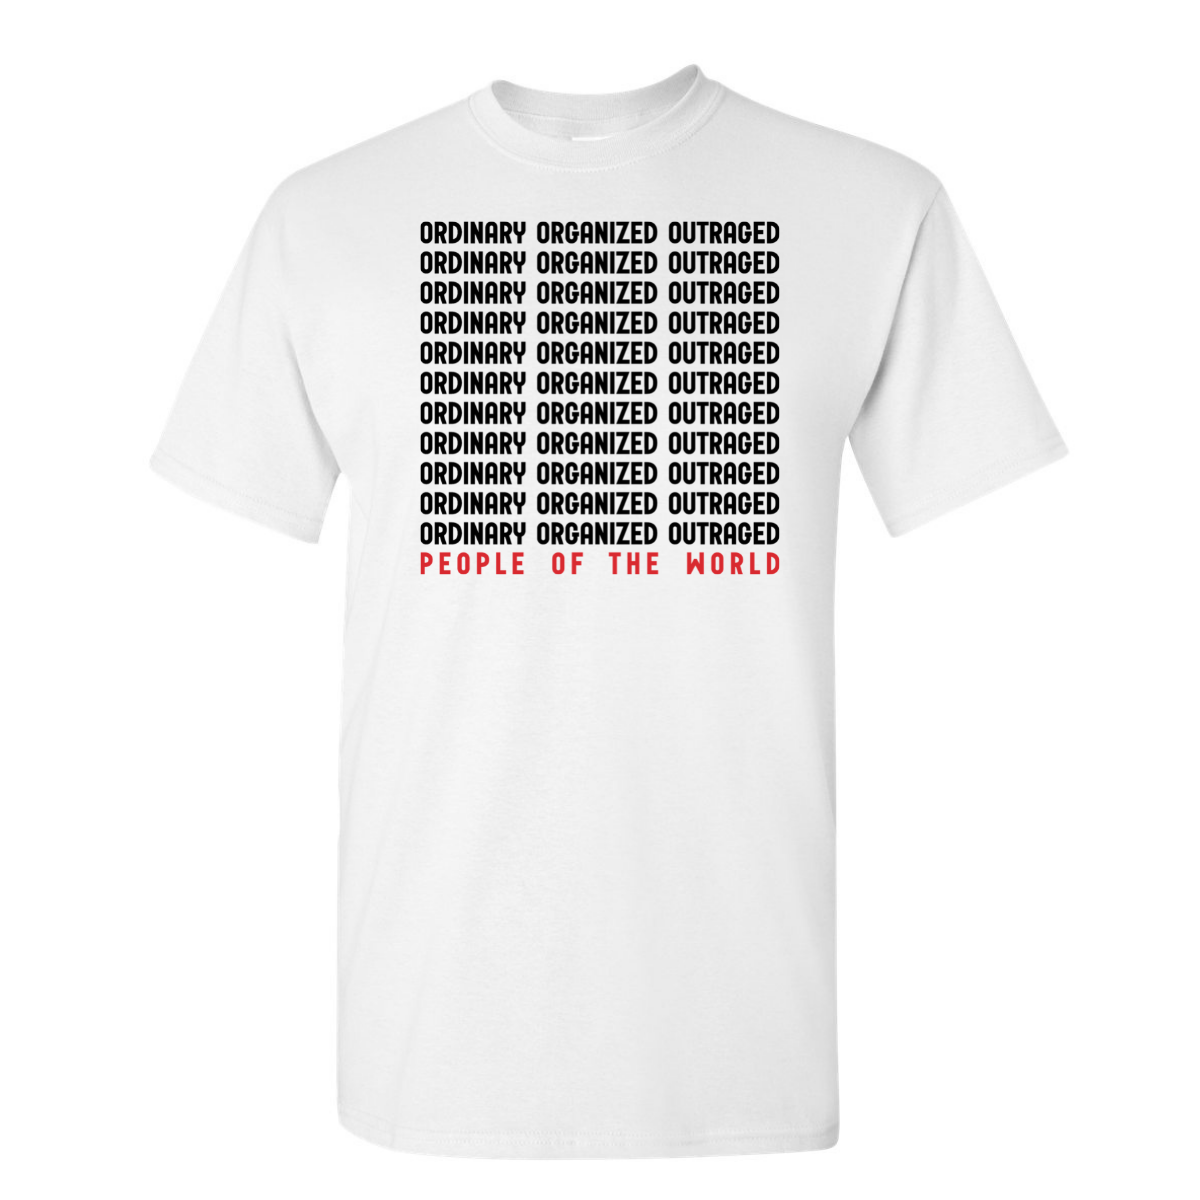 People Of The World - Unisex Tee (White)